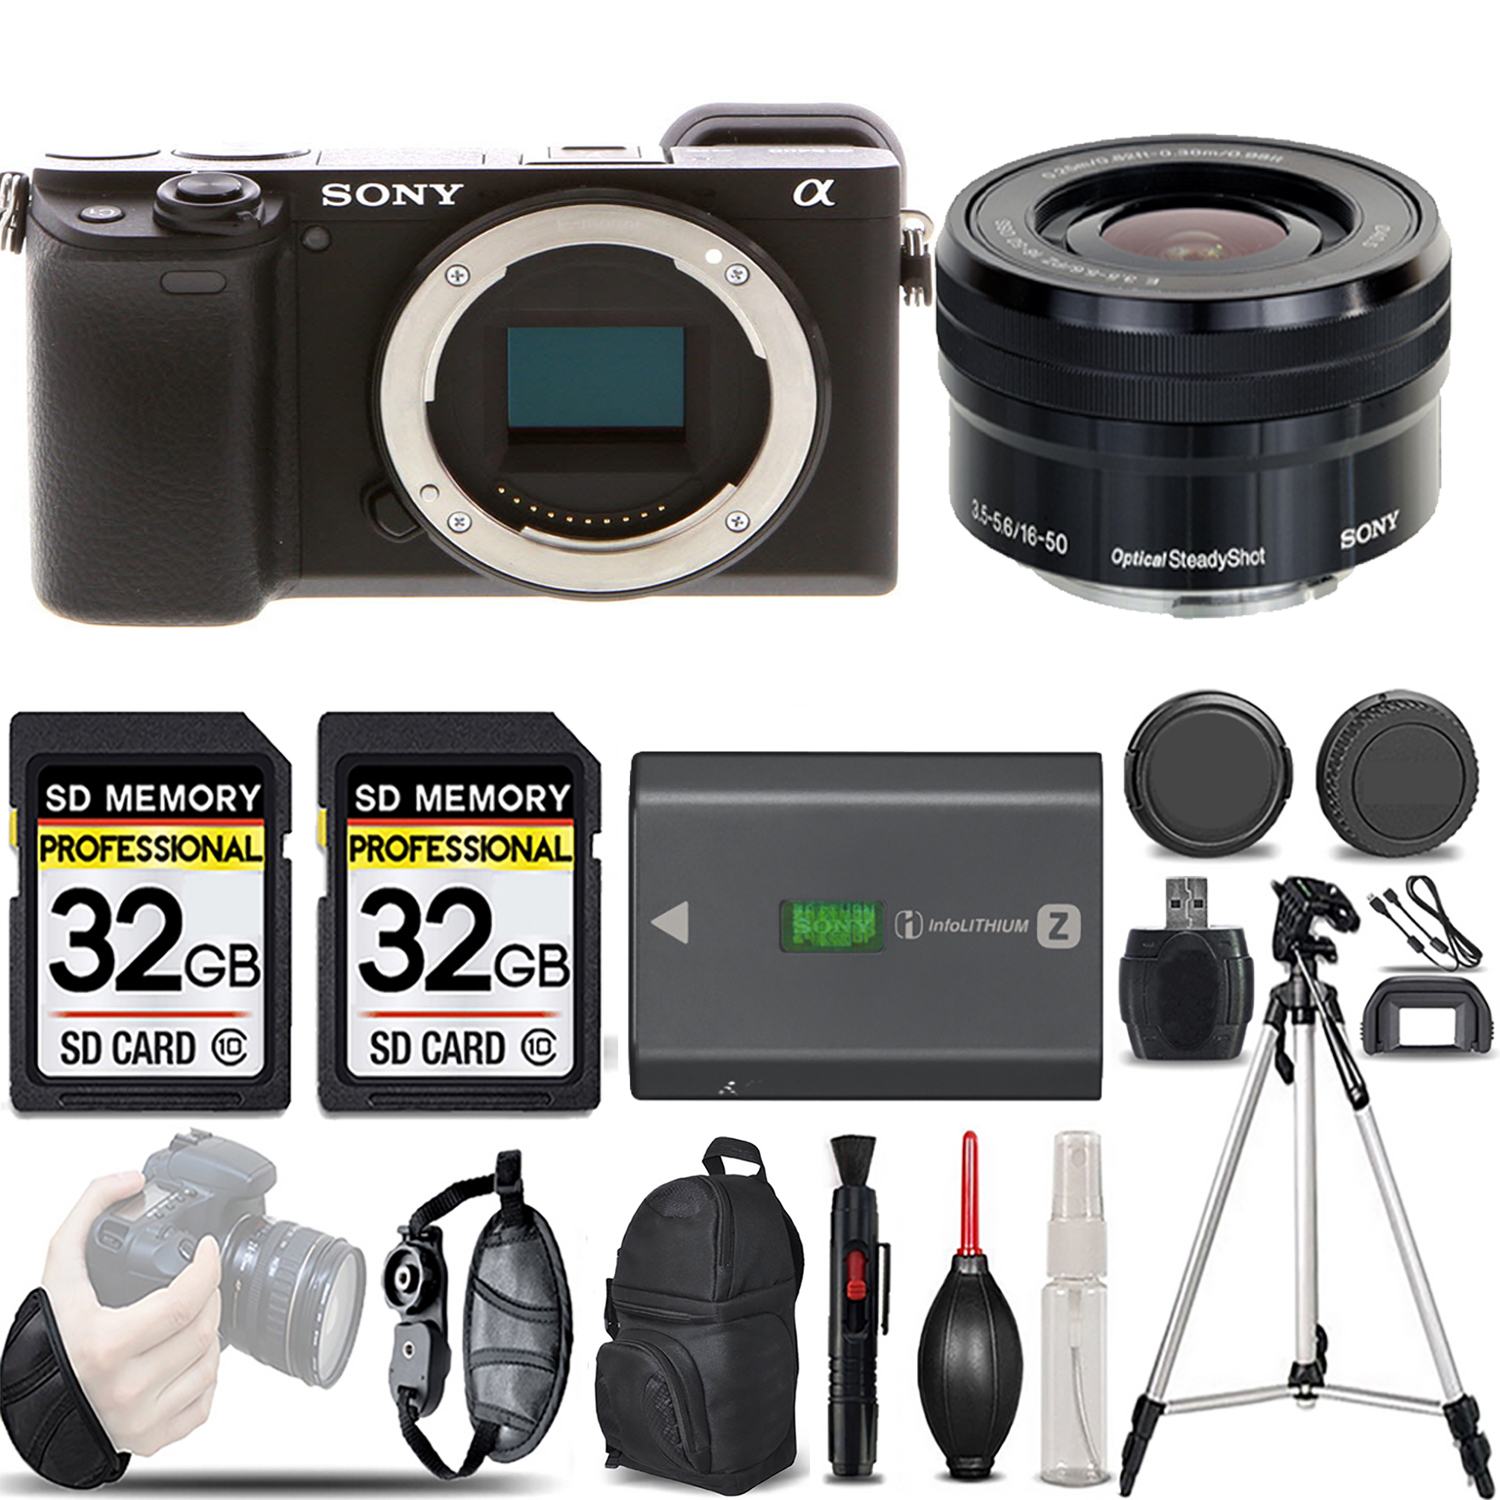 a6400 Mirrorless Camera + 16-50mm f/3.5-5.6 OSS Lens - LOADED KIT (ILCE-6400/B) *FREE SHIPPING*